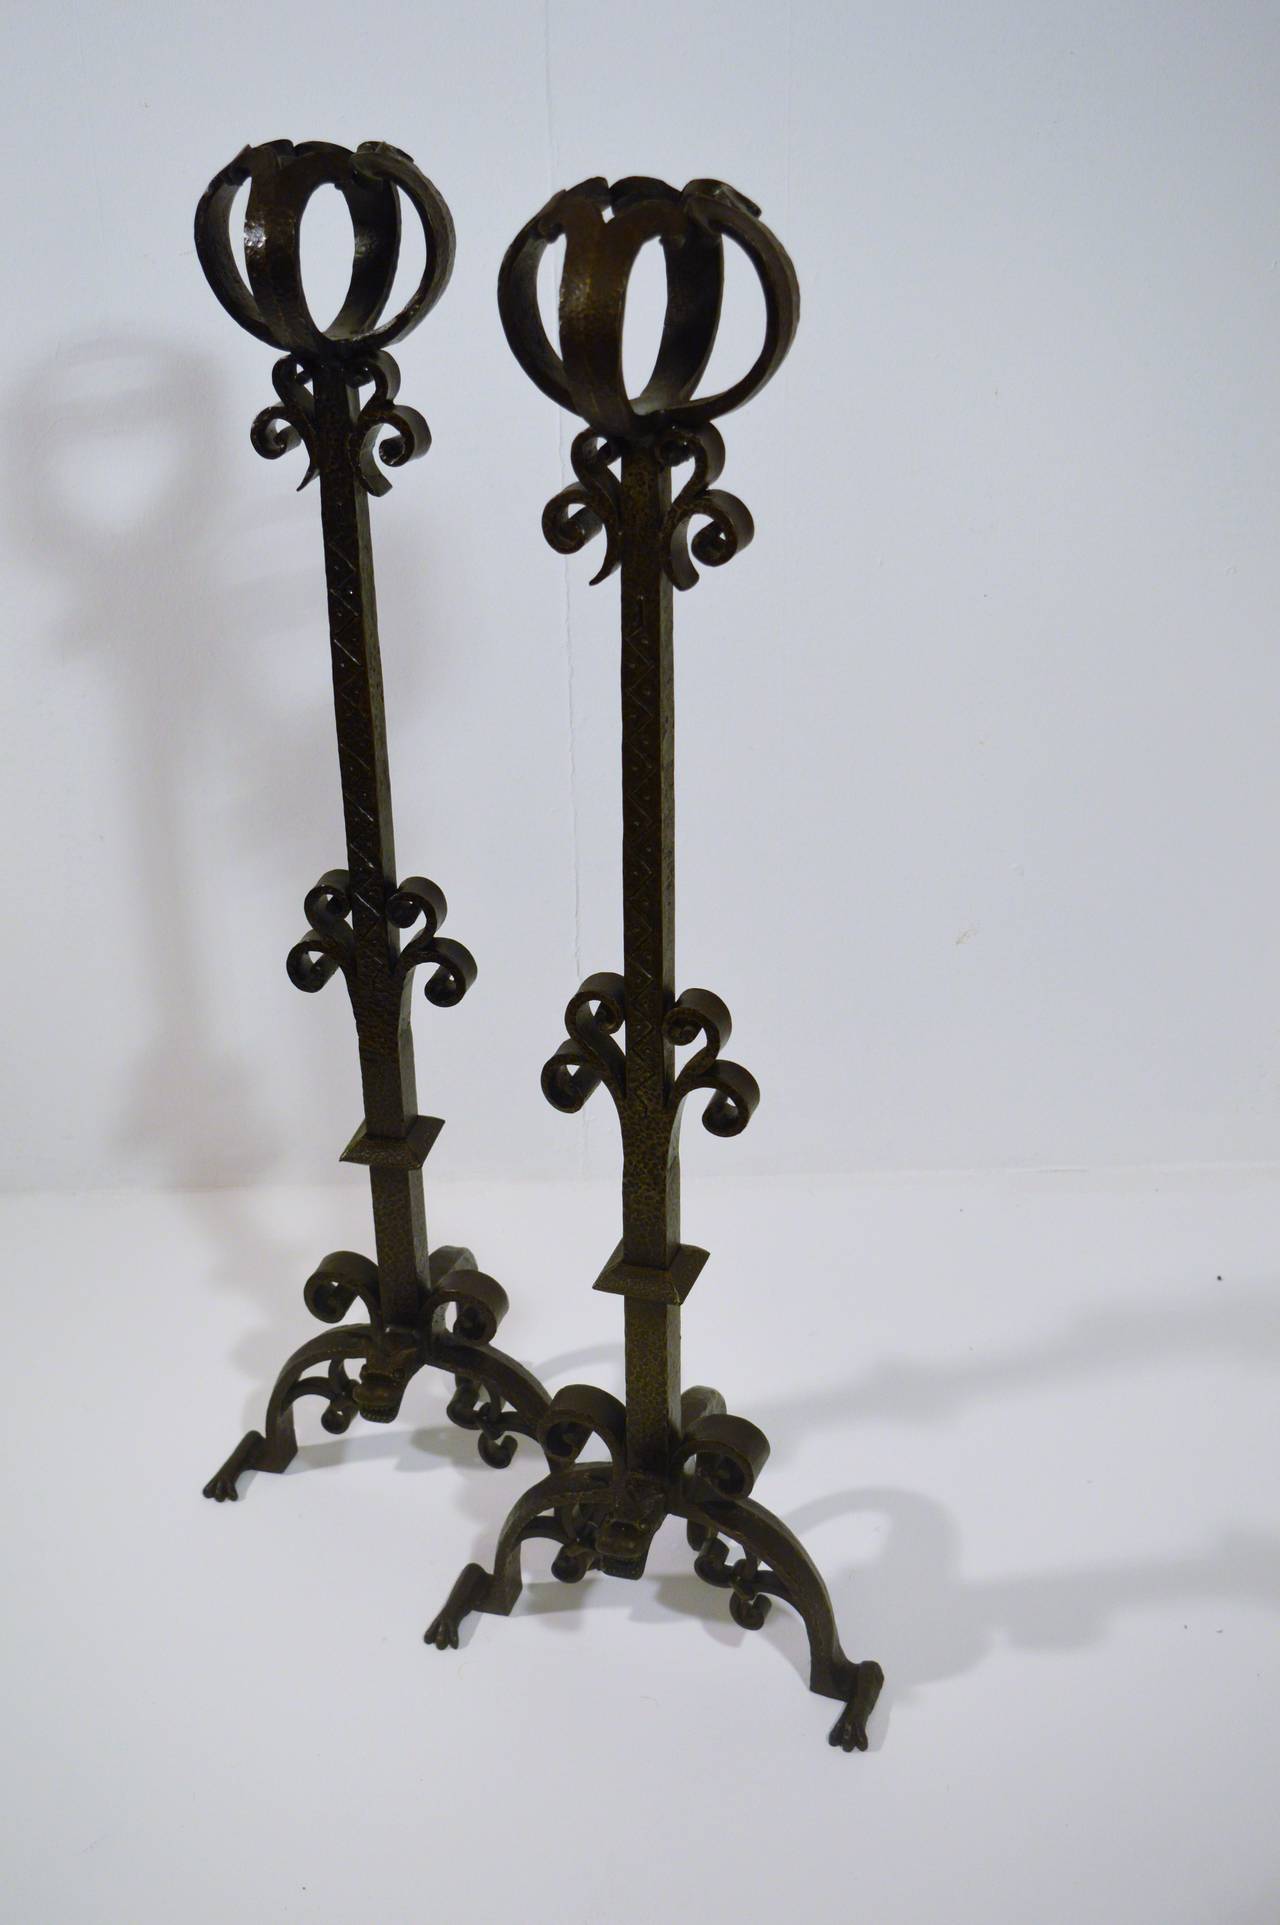 Very interesting wrought-iron chenets, circa 1900, with some very artistic detaills.